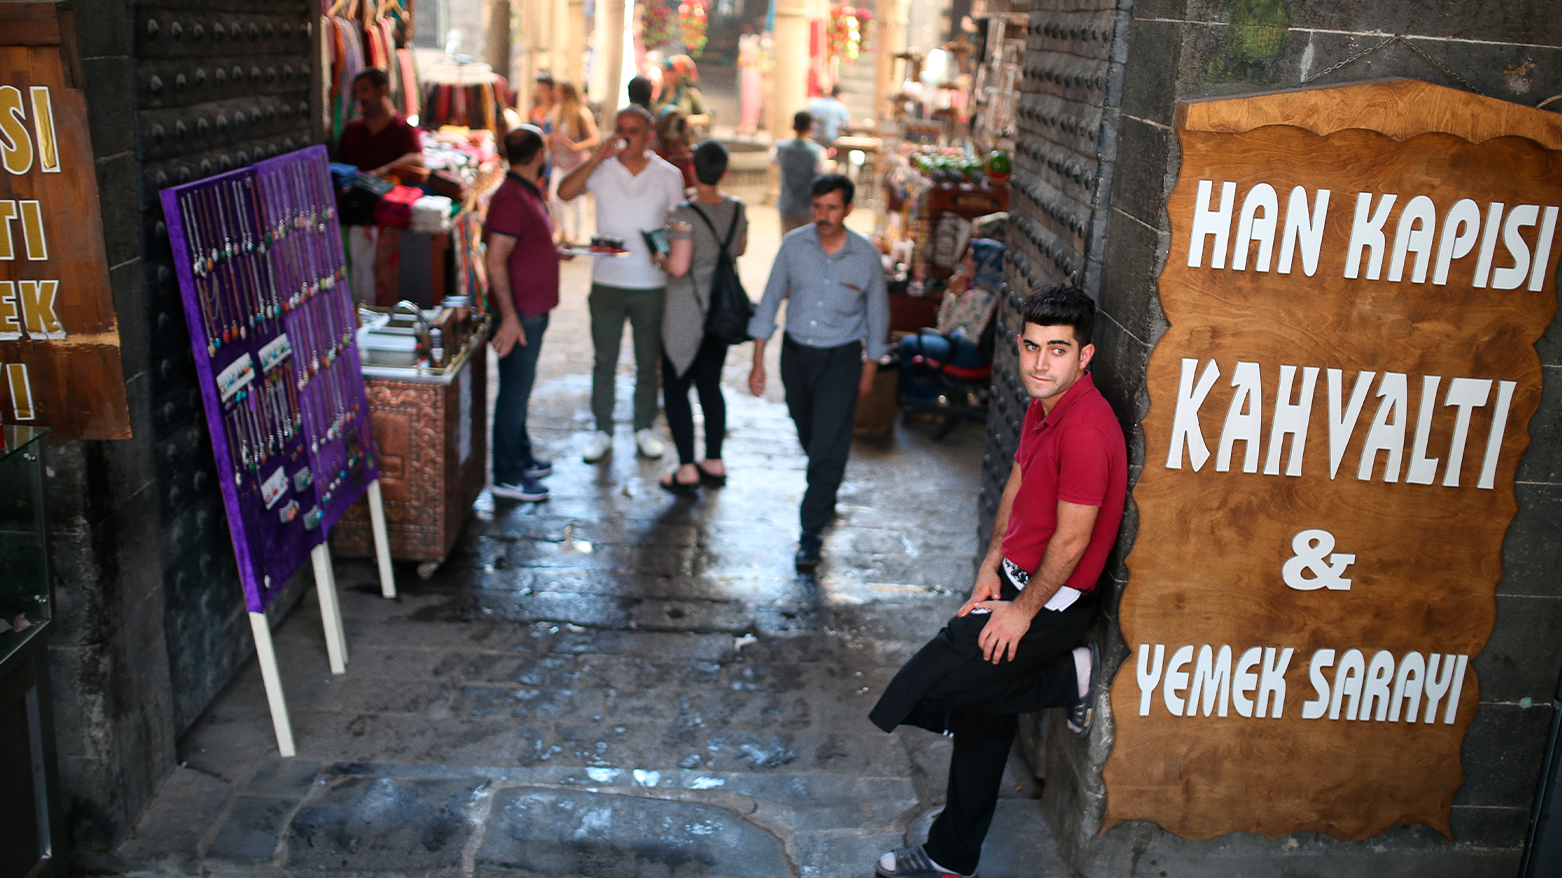 A day after elections, people walk in the mainly-Kurdish city of Diyarbakir, southeastern Turkey, Monday, June 25, 2018. (Photo: AP/Emre Tazegul)